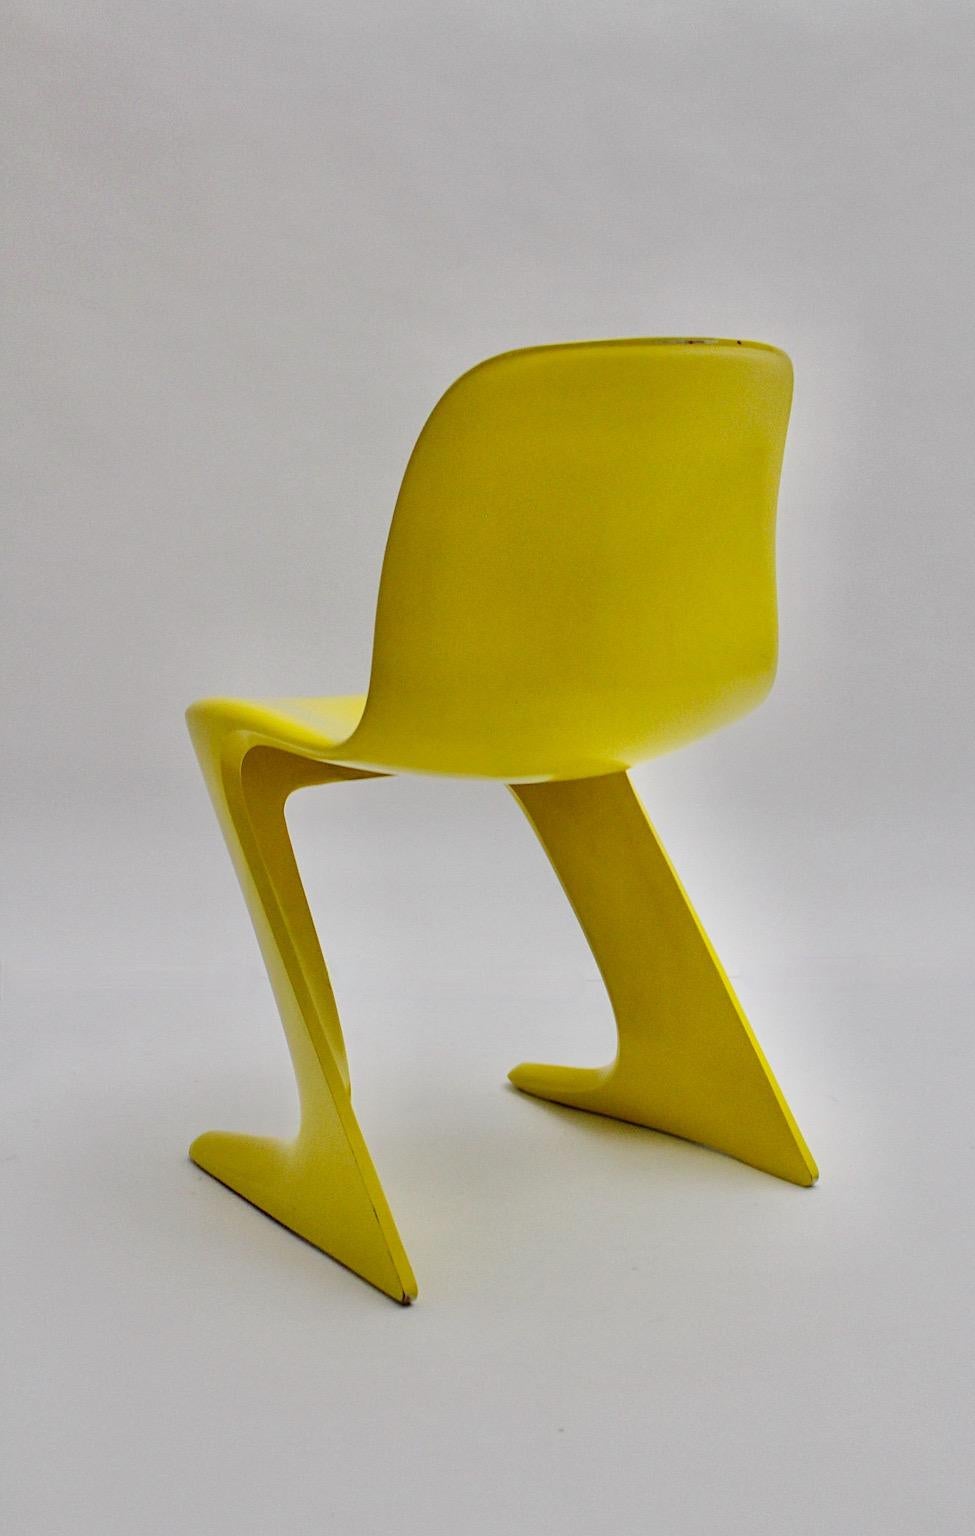 Mid-20th Century Space Age Vintage Yellow Plastic Chair Kangaroo Chair Ernst Moeckl 1960s Germany For Sale